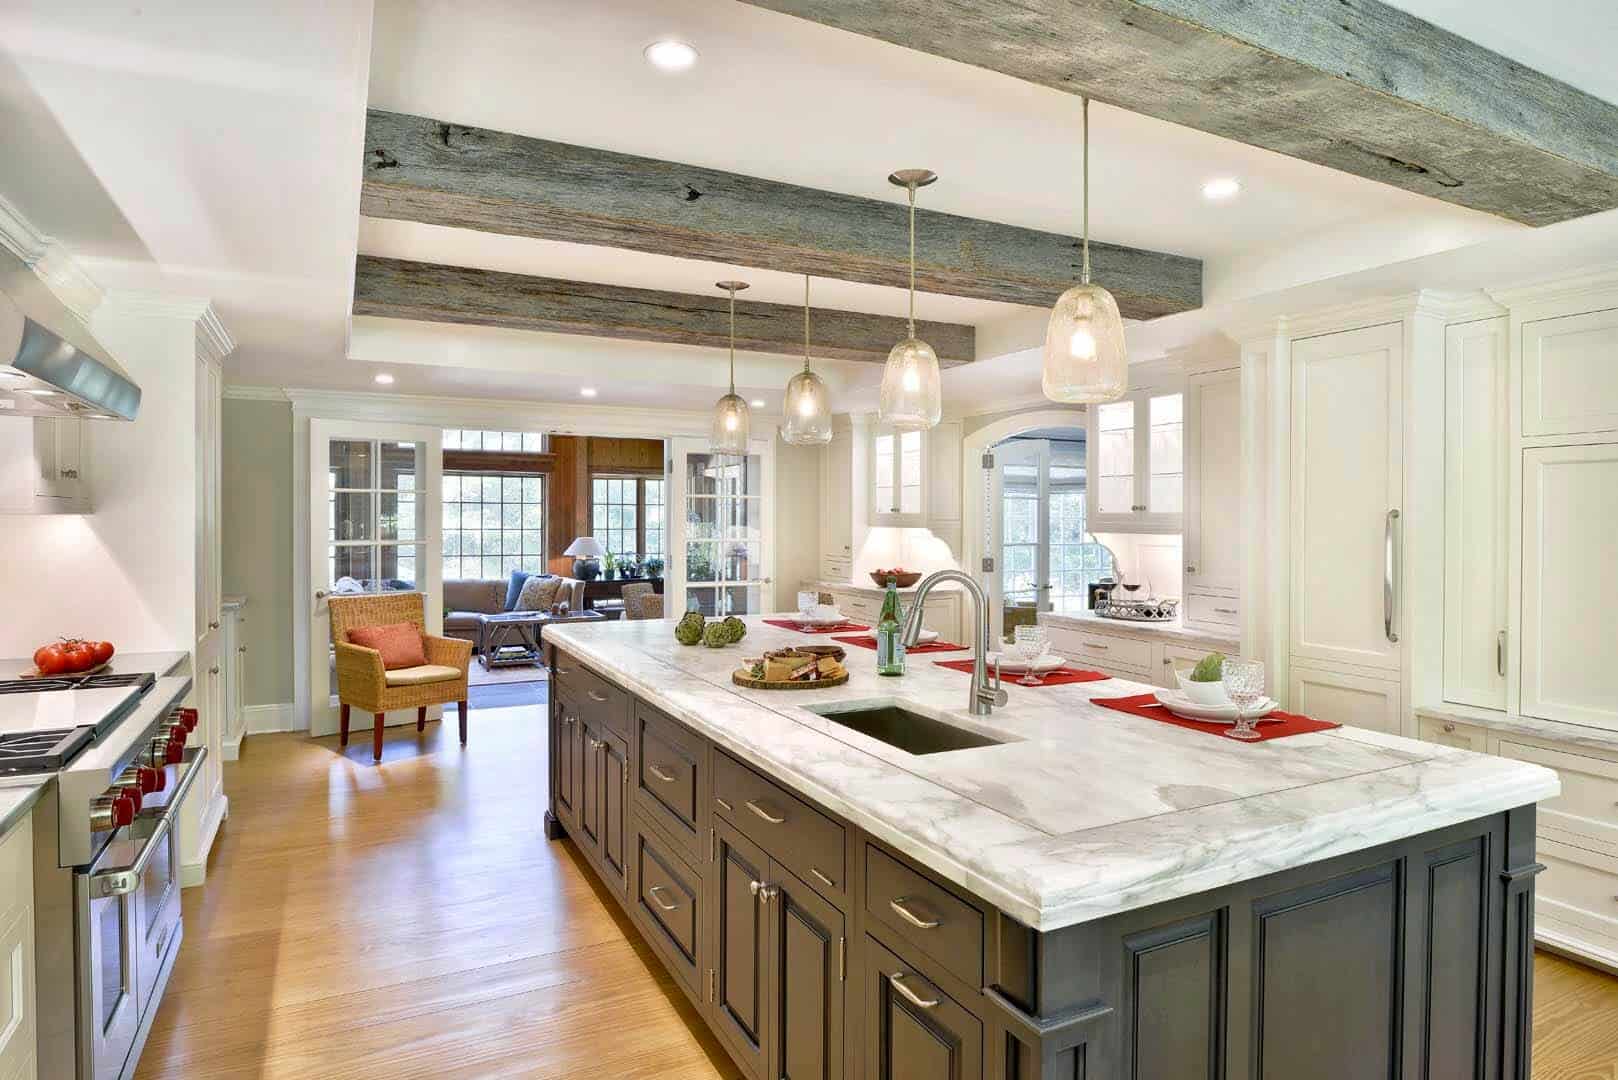 Expansive kitchen in Waccabuc NY features exposed beams, white Bilotta cabinetry and large grey island with marble top.